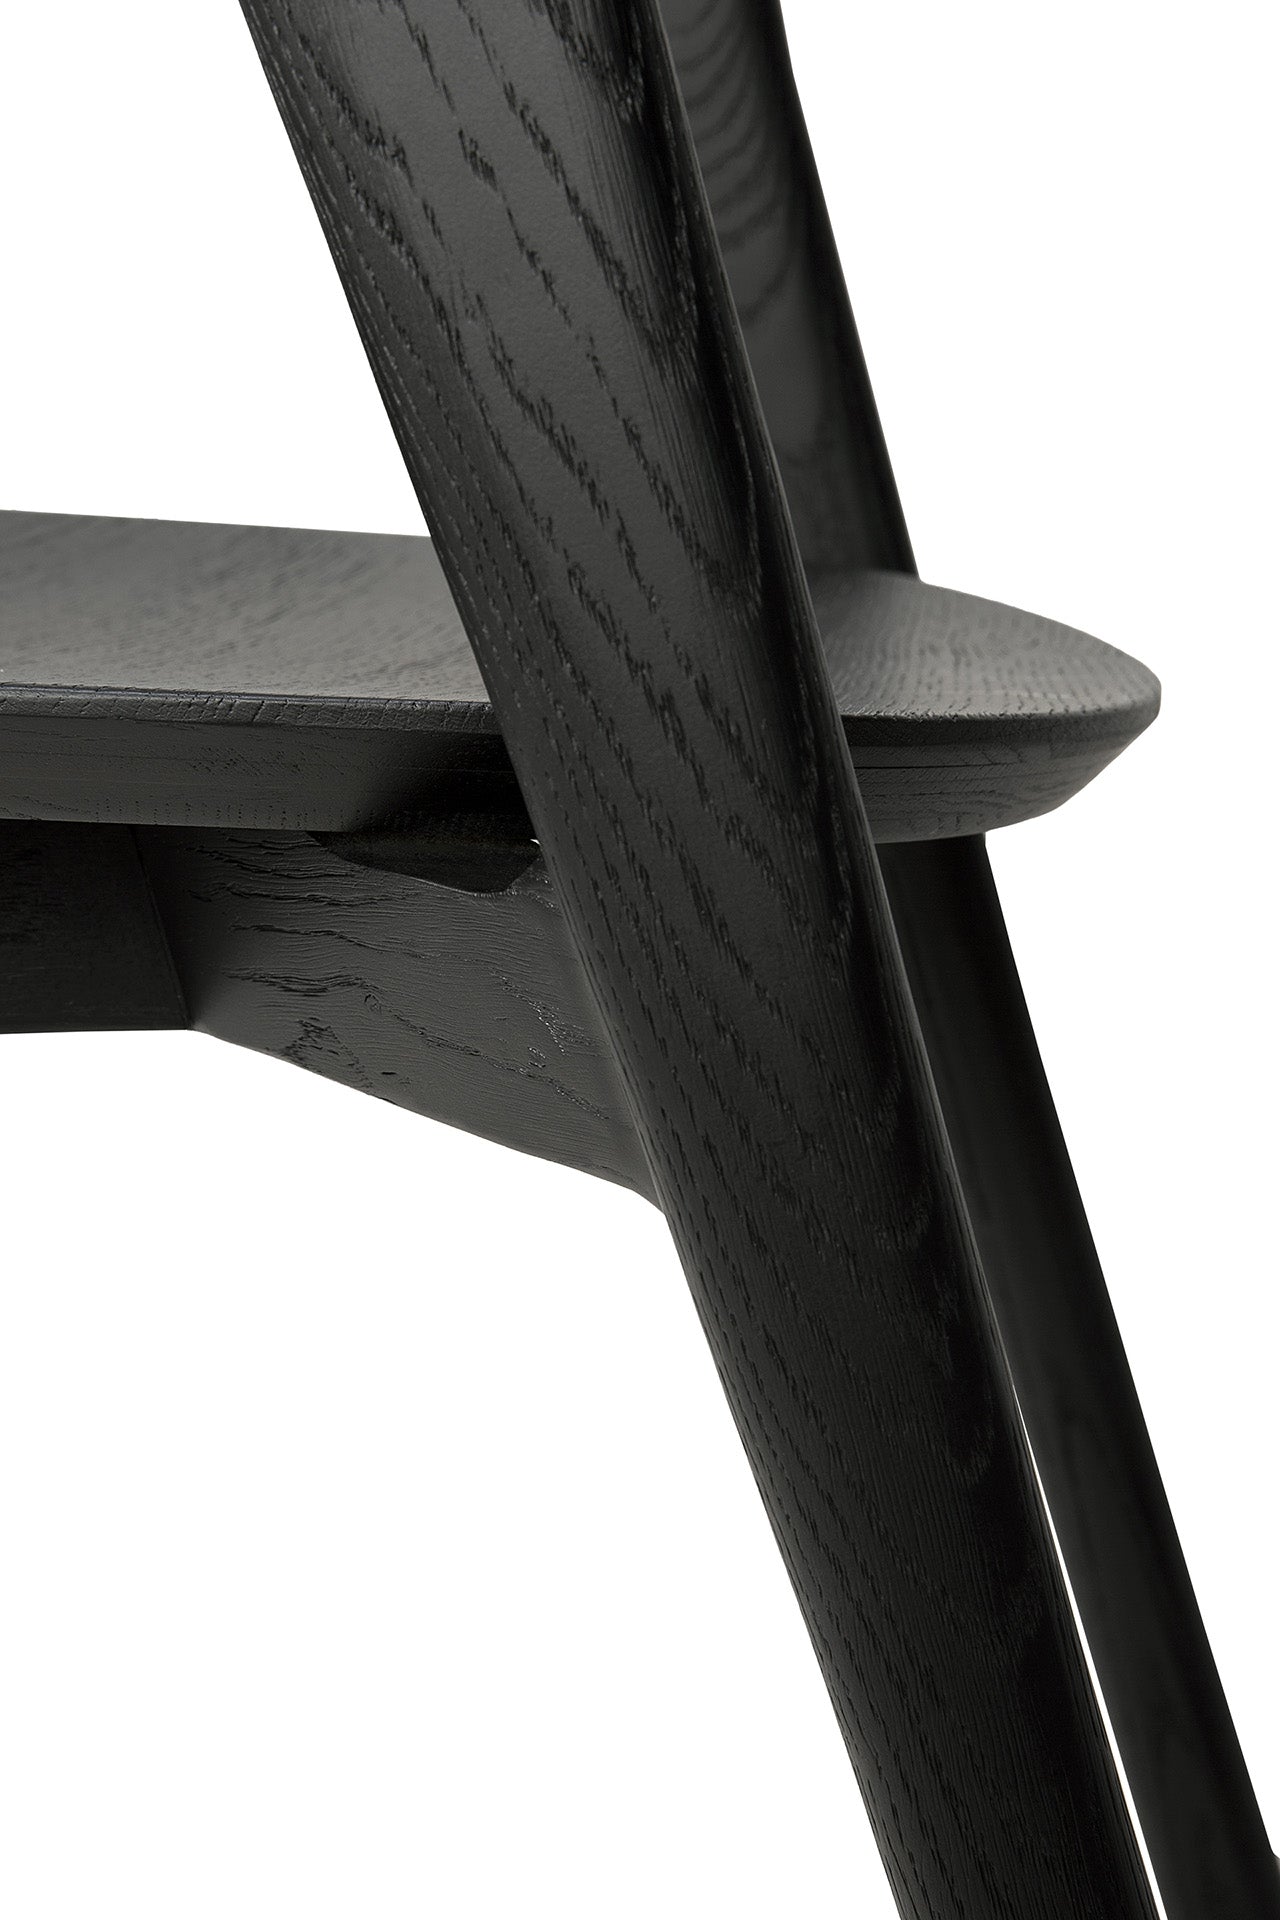 Ethnicraft Oak Bok Black Dining Chair is available from Make Your House A Home, Bendigo, Victoria, Australia